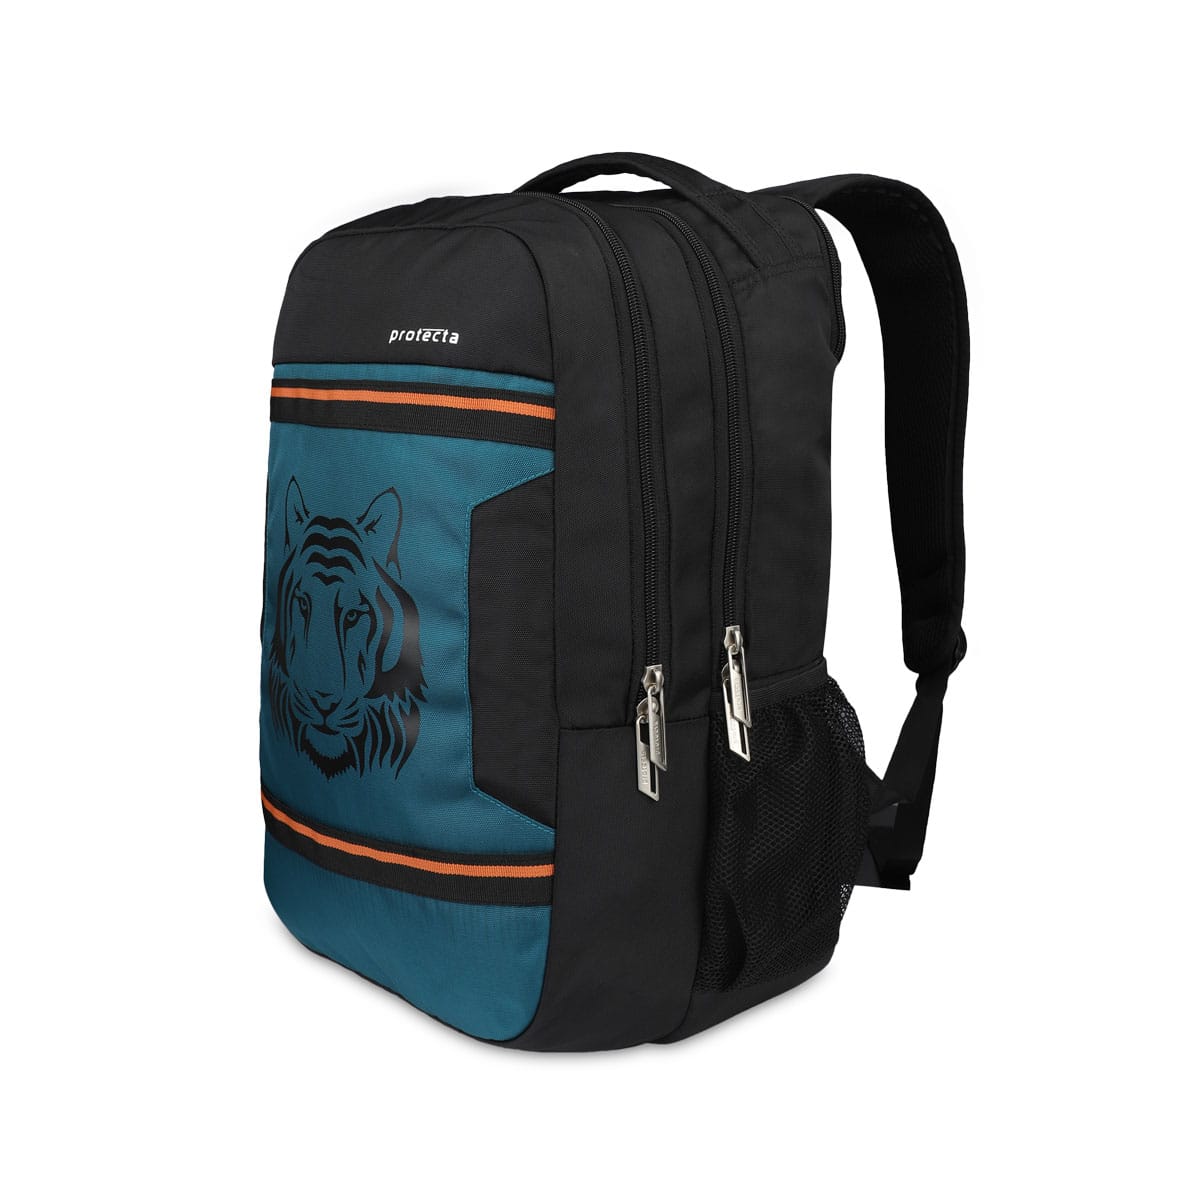 Black-Astral | Protecta Harmony Laptop Backpack-1